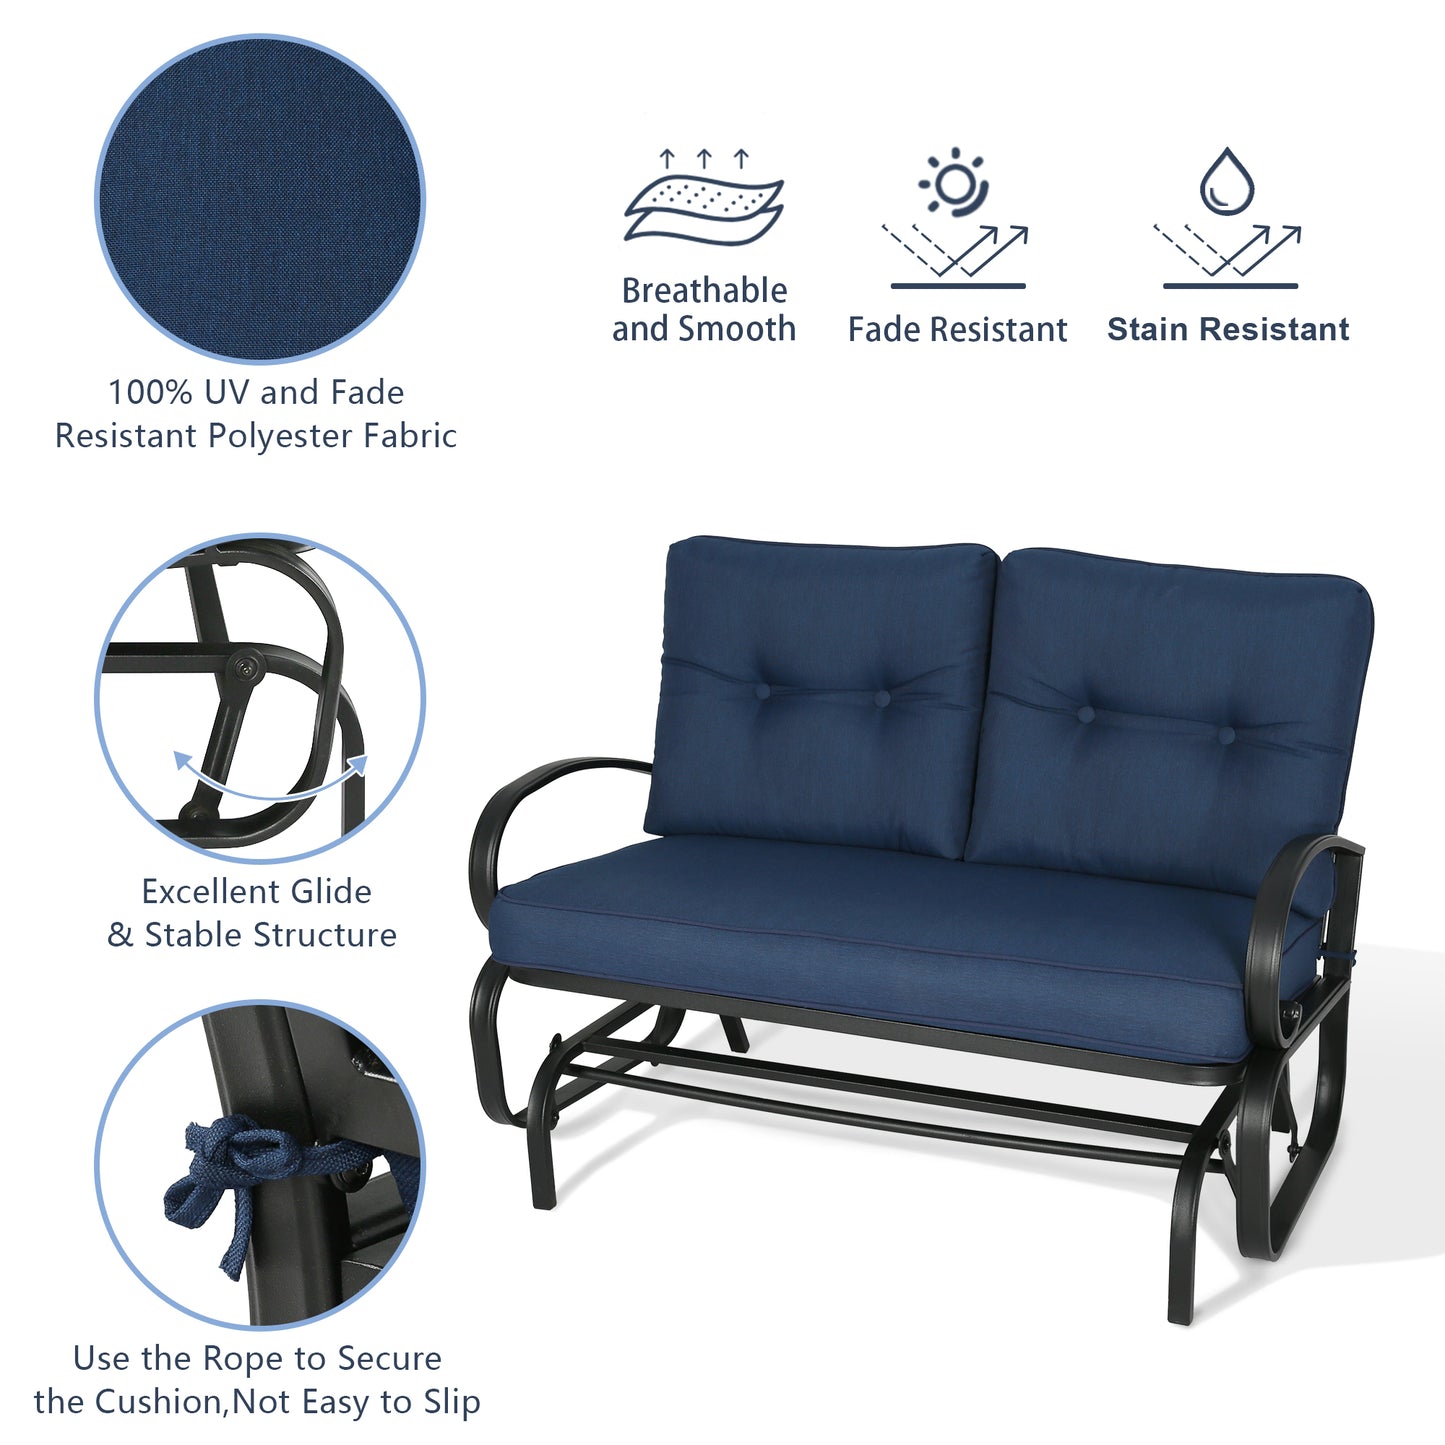 Patio Glider Bench Loveseat Outdoor Cushioed 2 Person Rocking Seating Patio Swing Chair, Navy